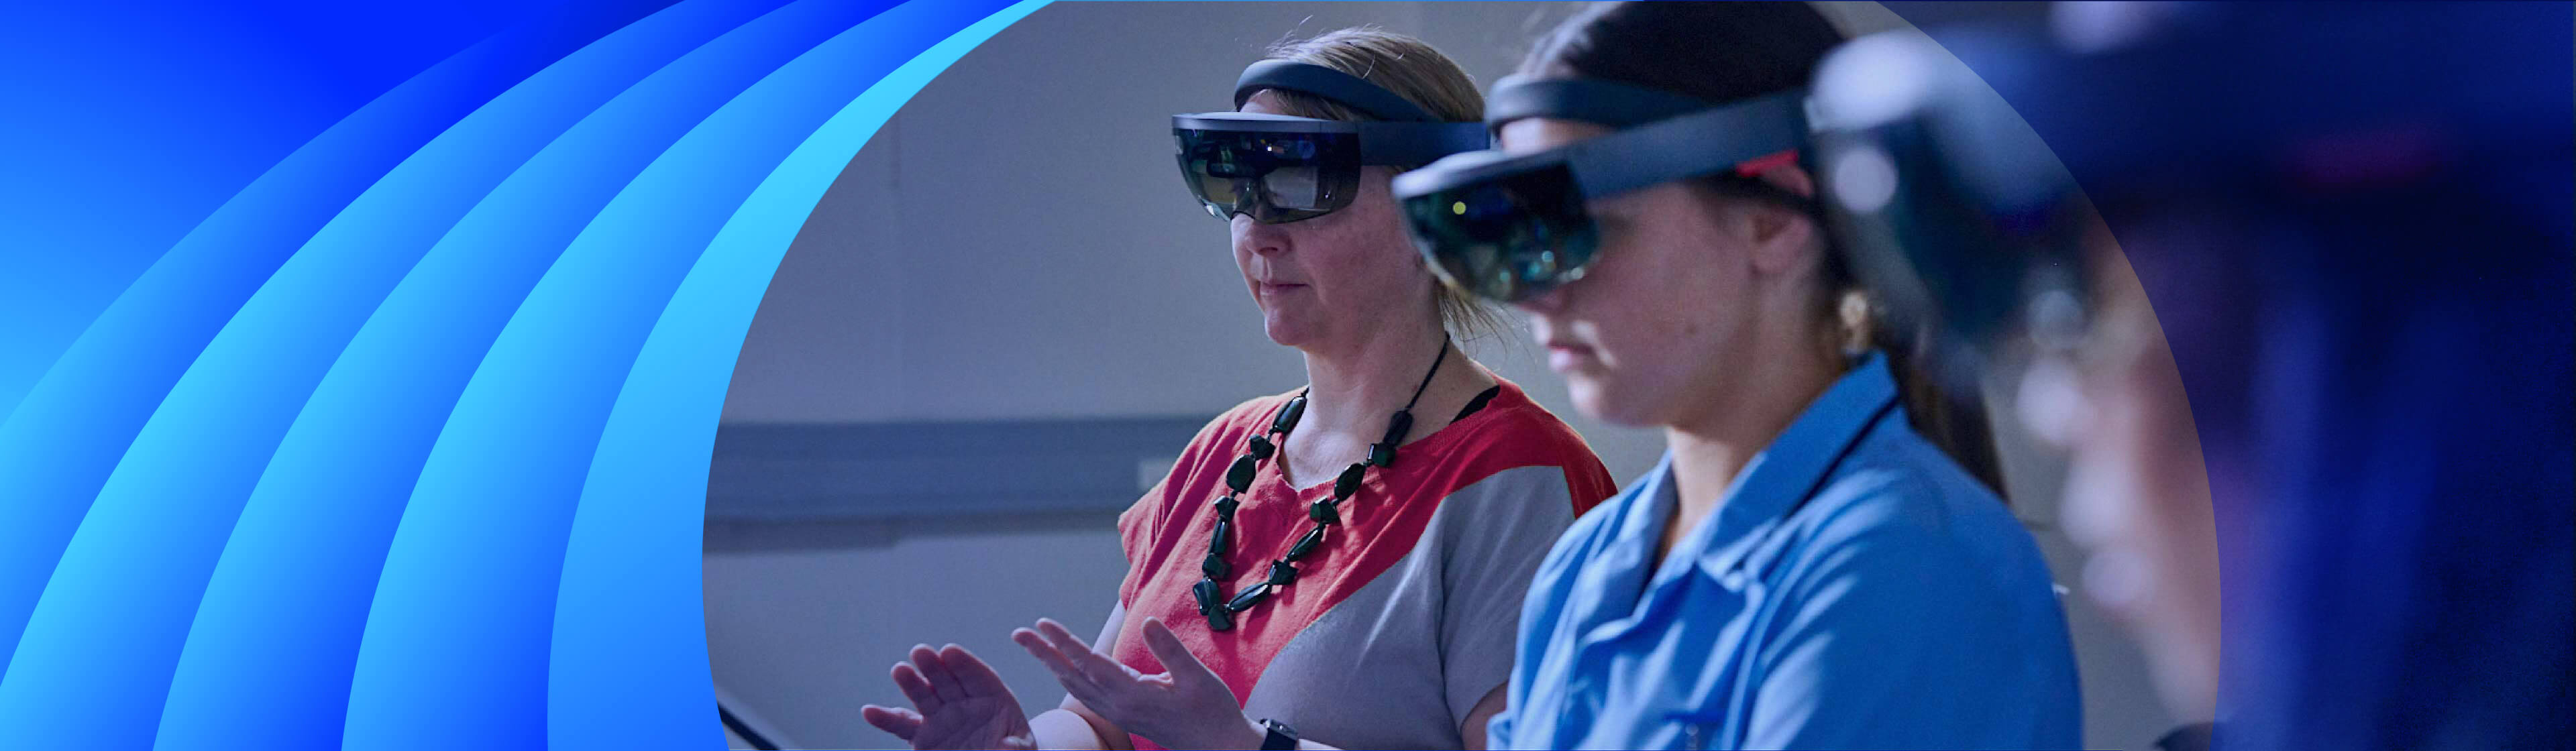 A female teacher and student using VR headsets